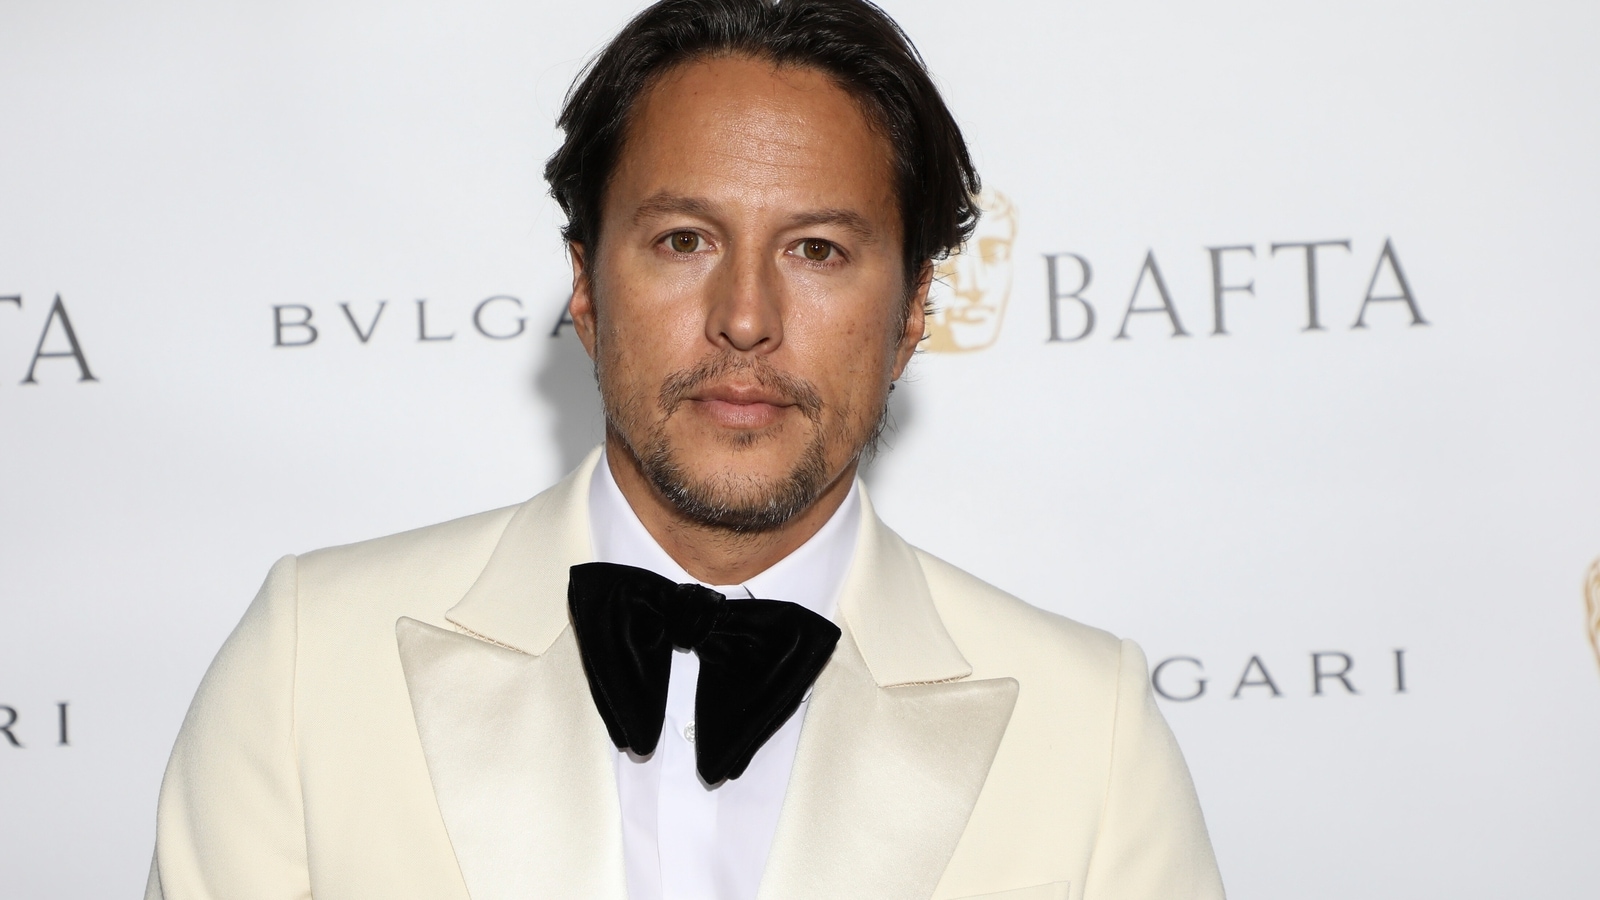 No Time to Die director Cary Fukunaga accused of sexual misconduct by multiple young actors